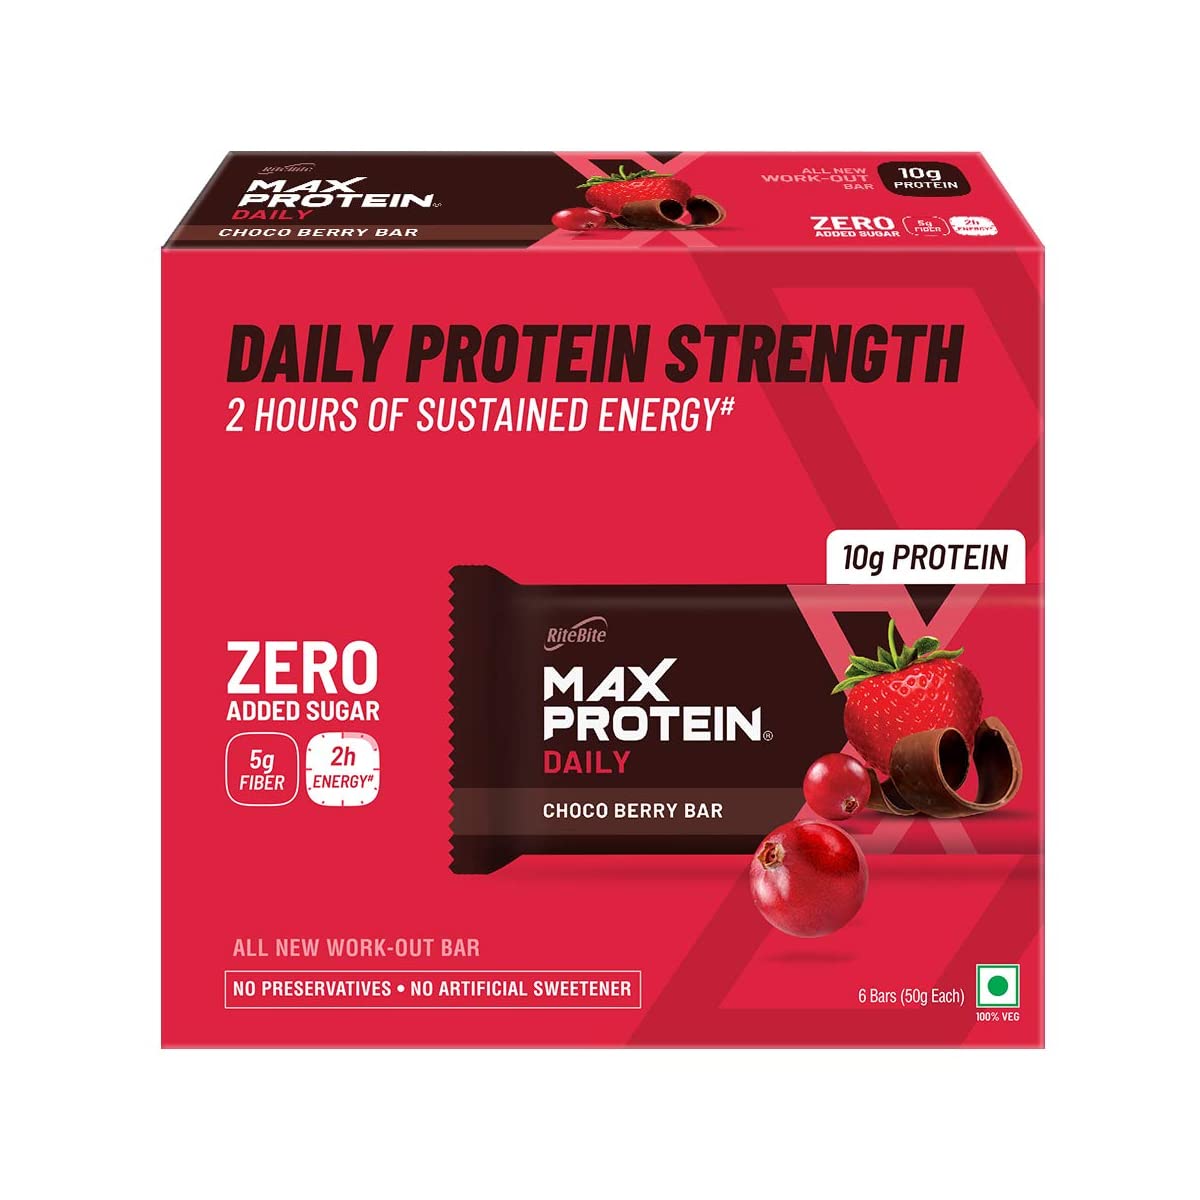 Max Protein Daily Choco Berry - 10g Protein (Pack of 6) RiteBite Max Protein